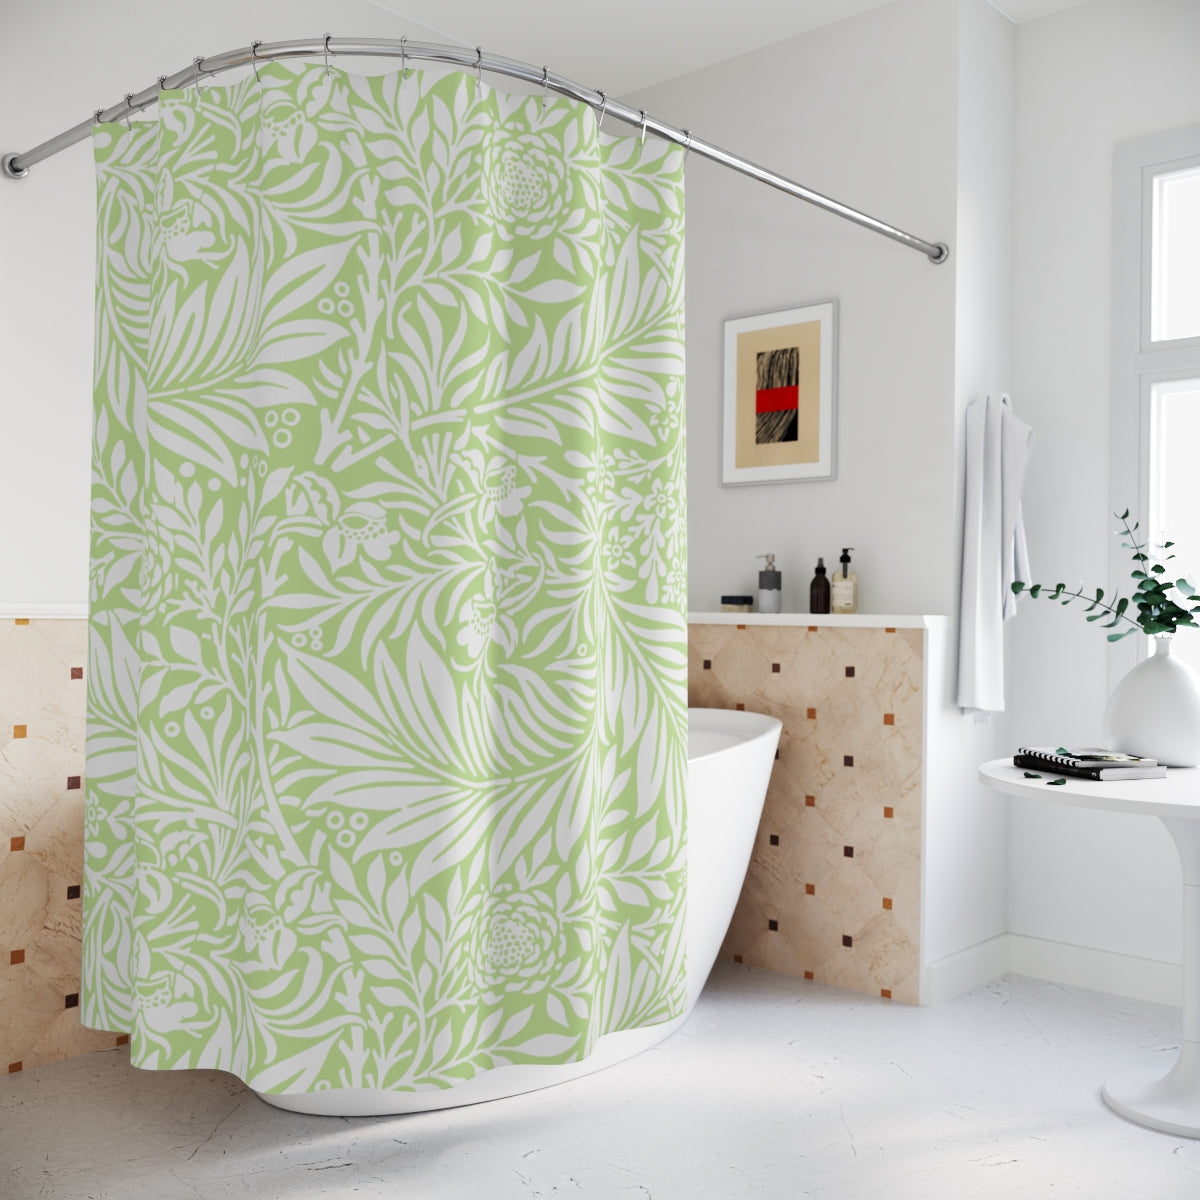 Floral Shower Curtain William Morris Inspired (5 colors)